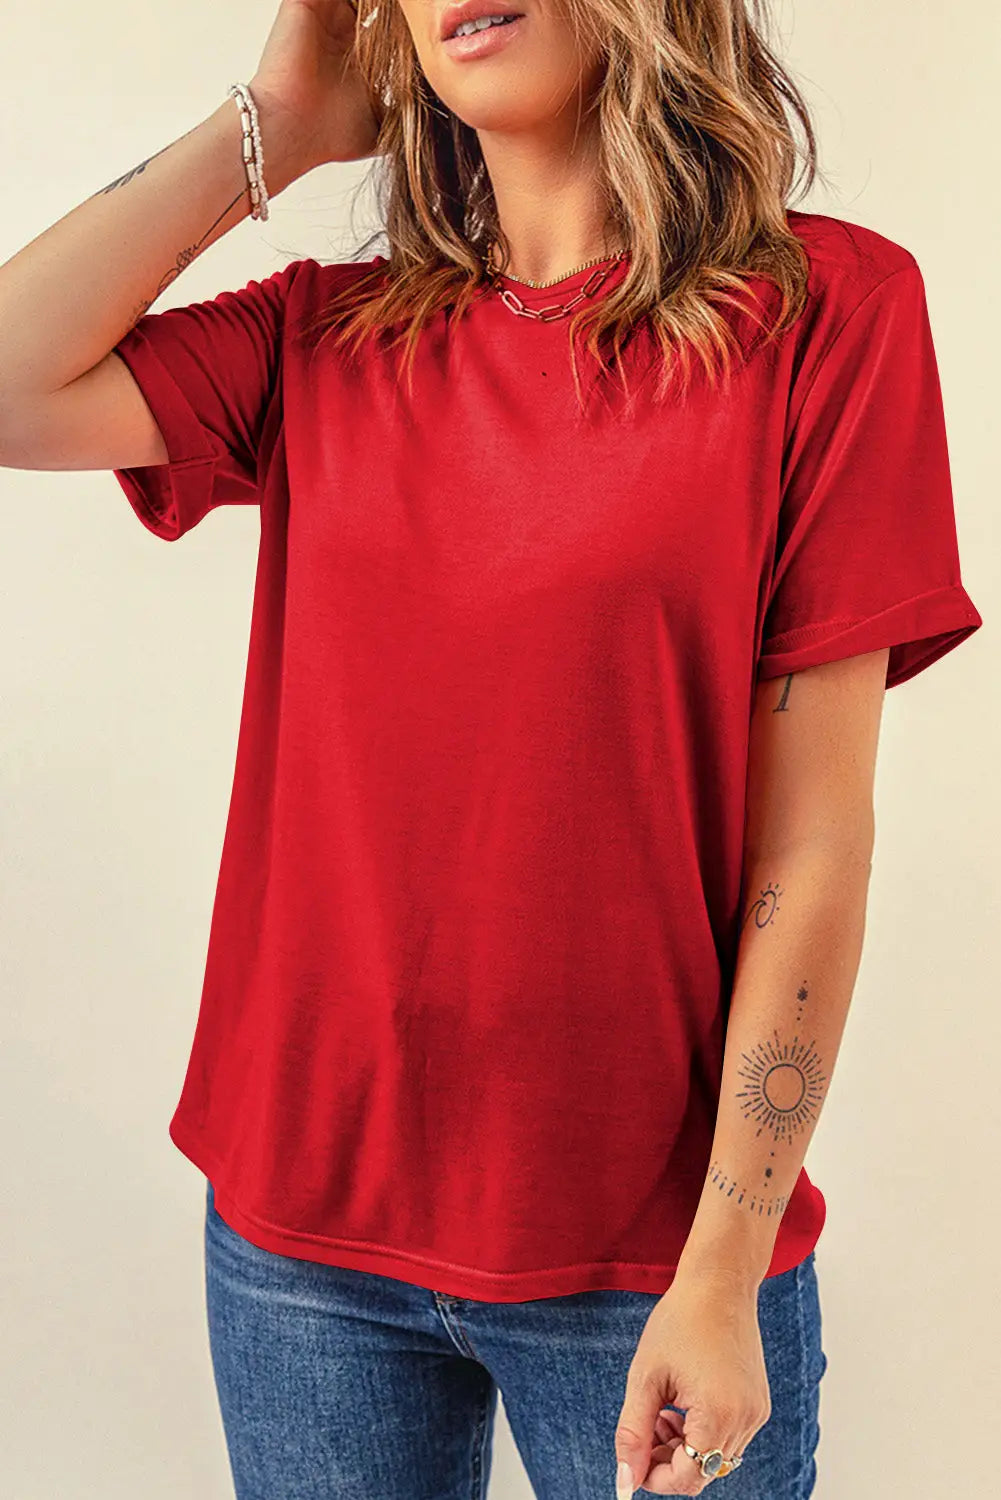 Gray casual plain crew neck tee - red-2 / 2xl / 62% polyester + 32% cotton + 6% elastane - t-shirts